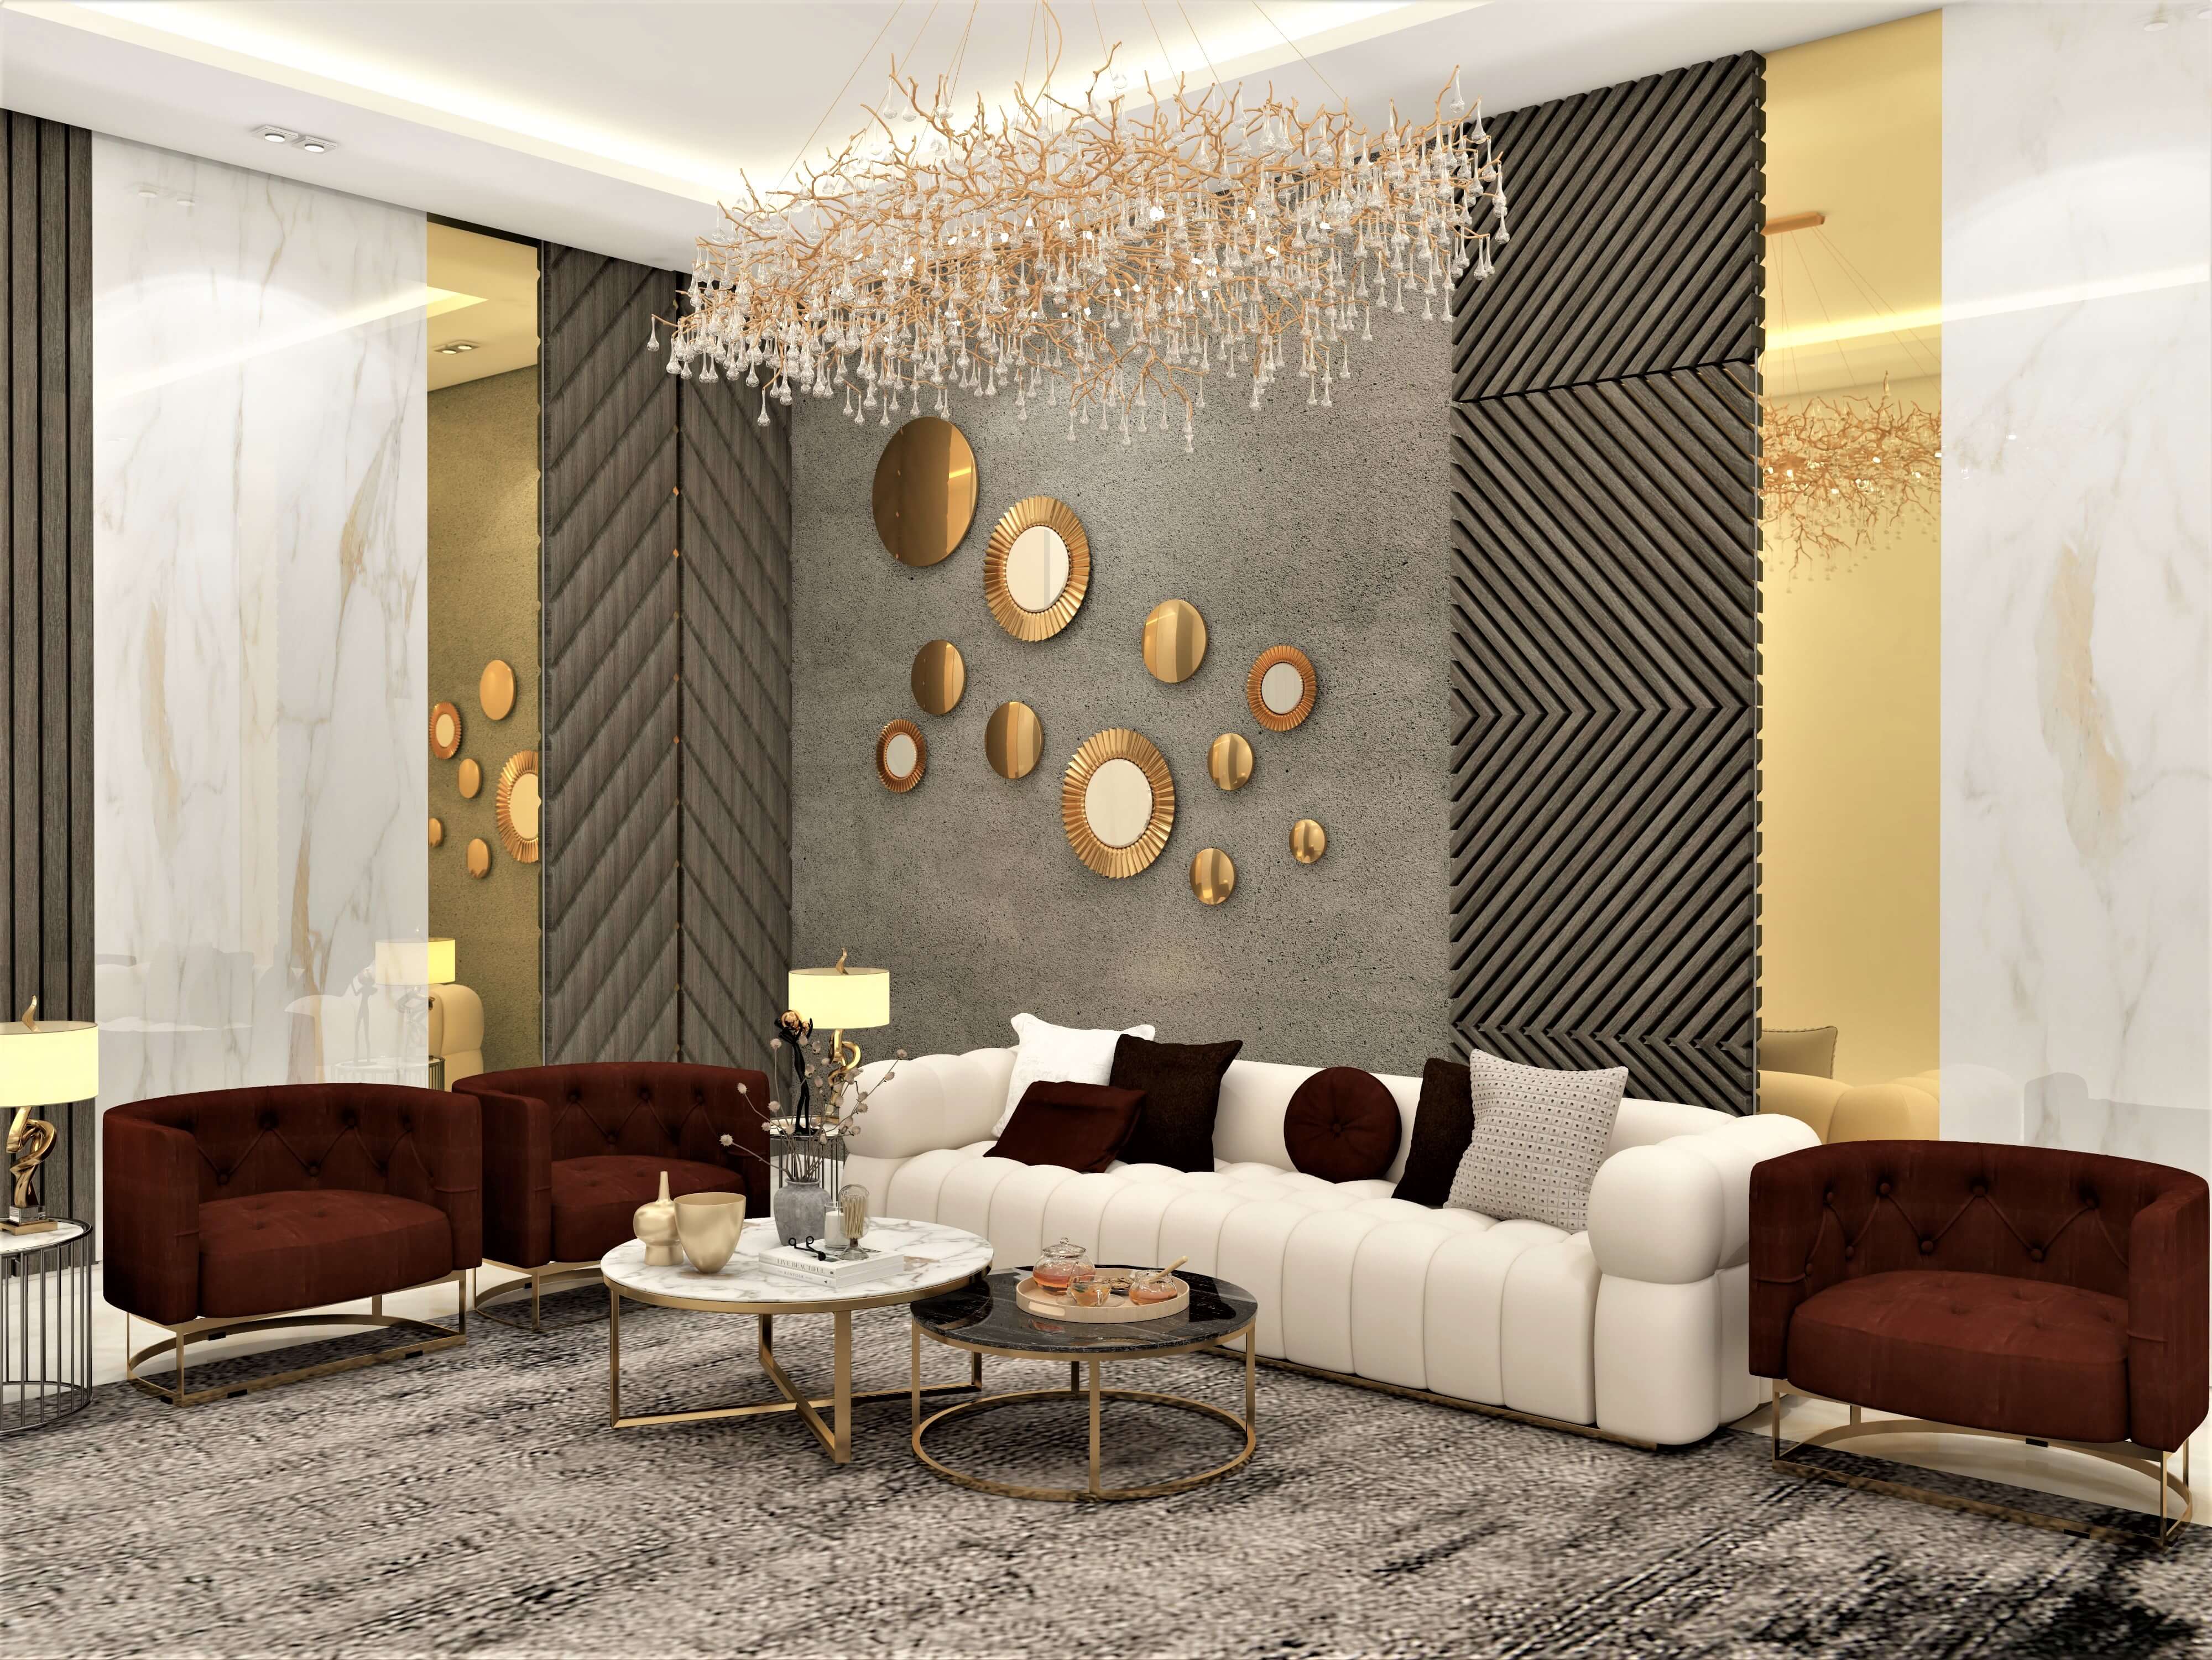 Contemporary living room design with golden art works - Beautiful Homes